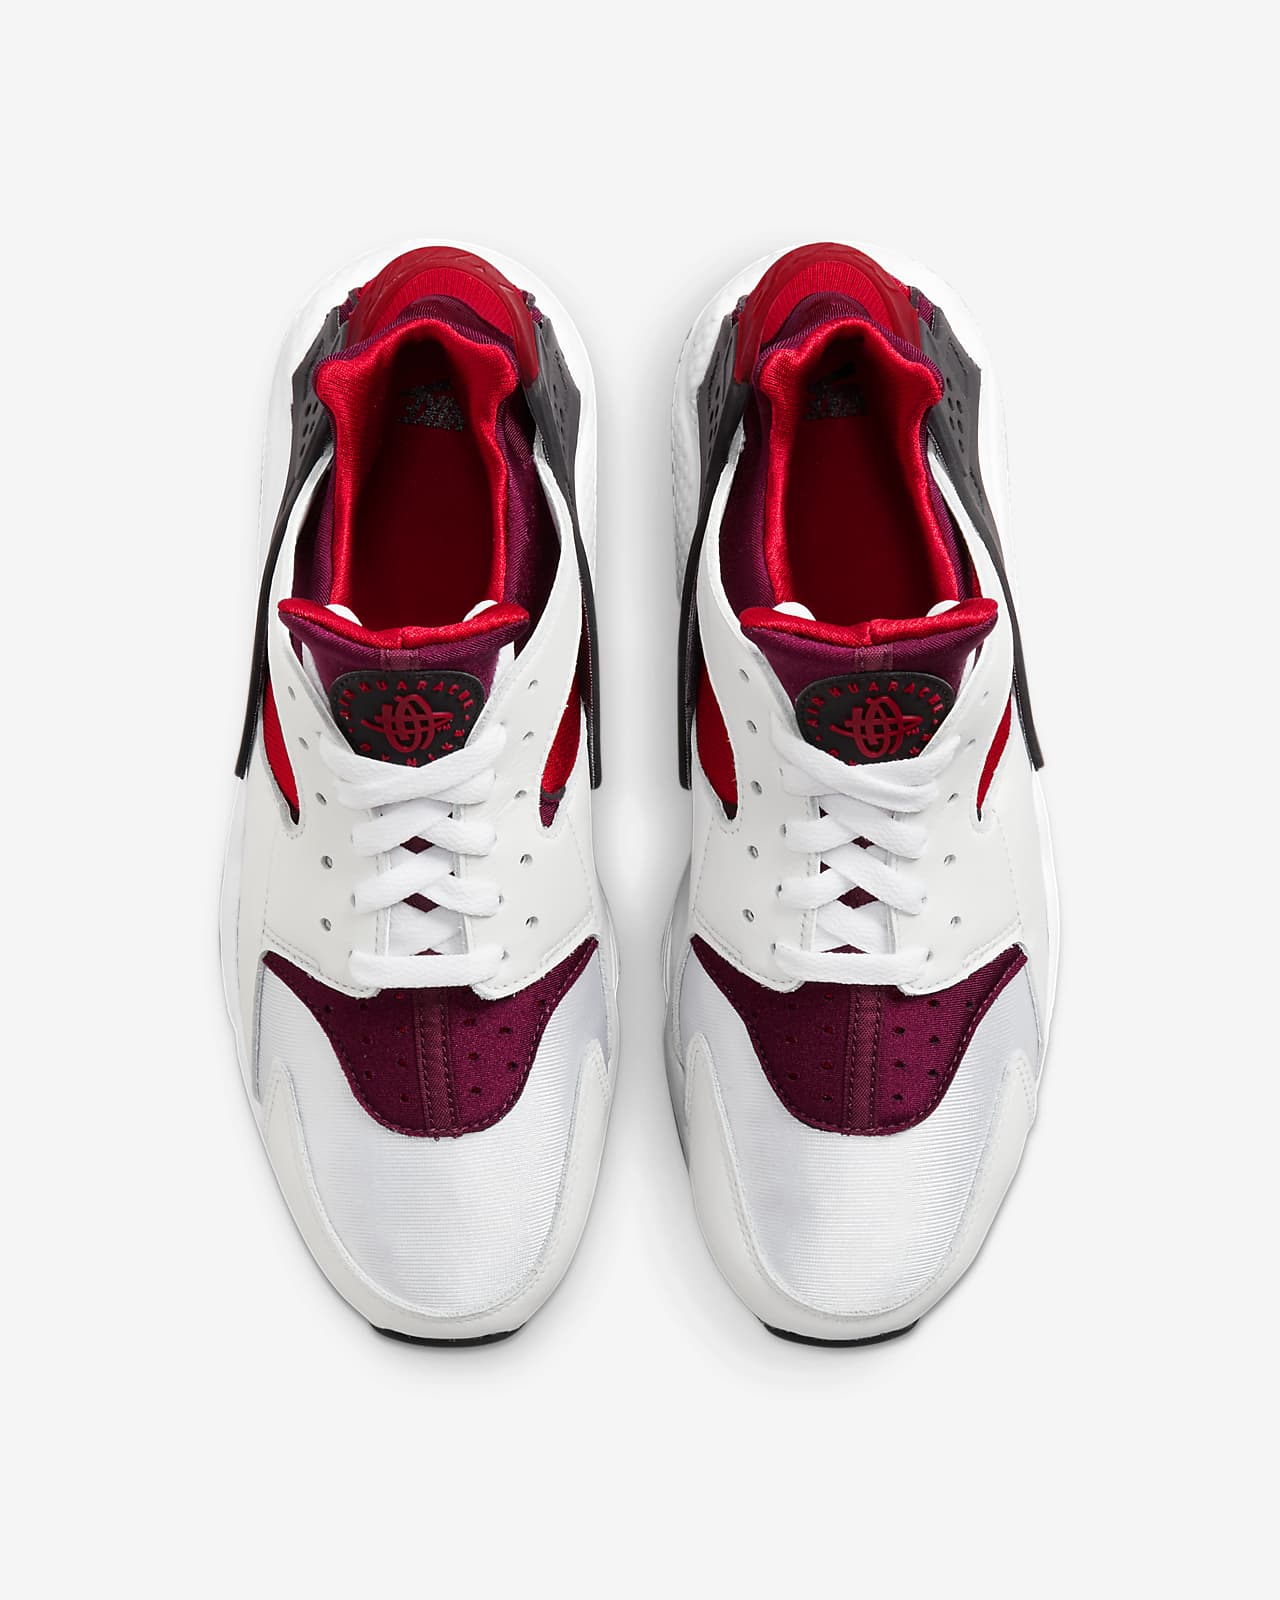 varsity red huaraches release date